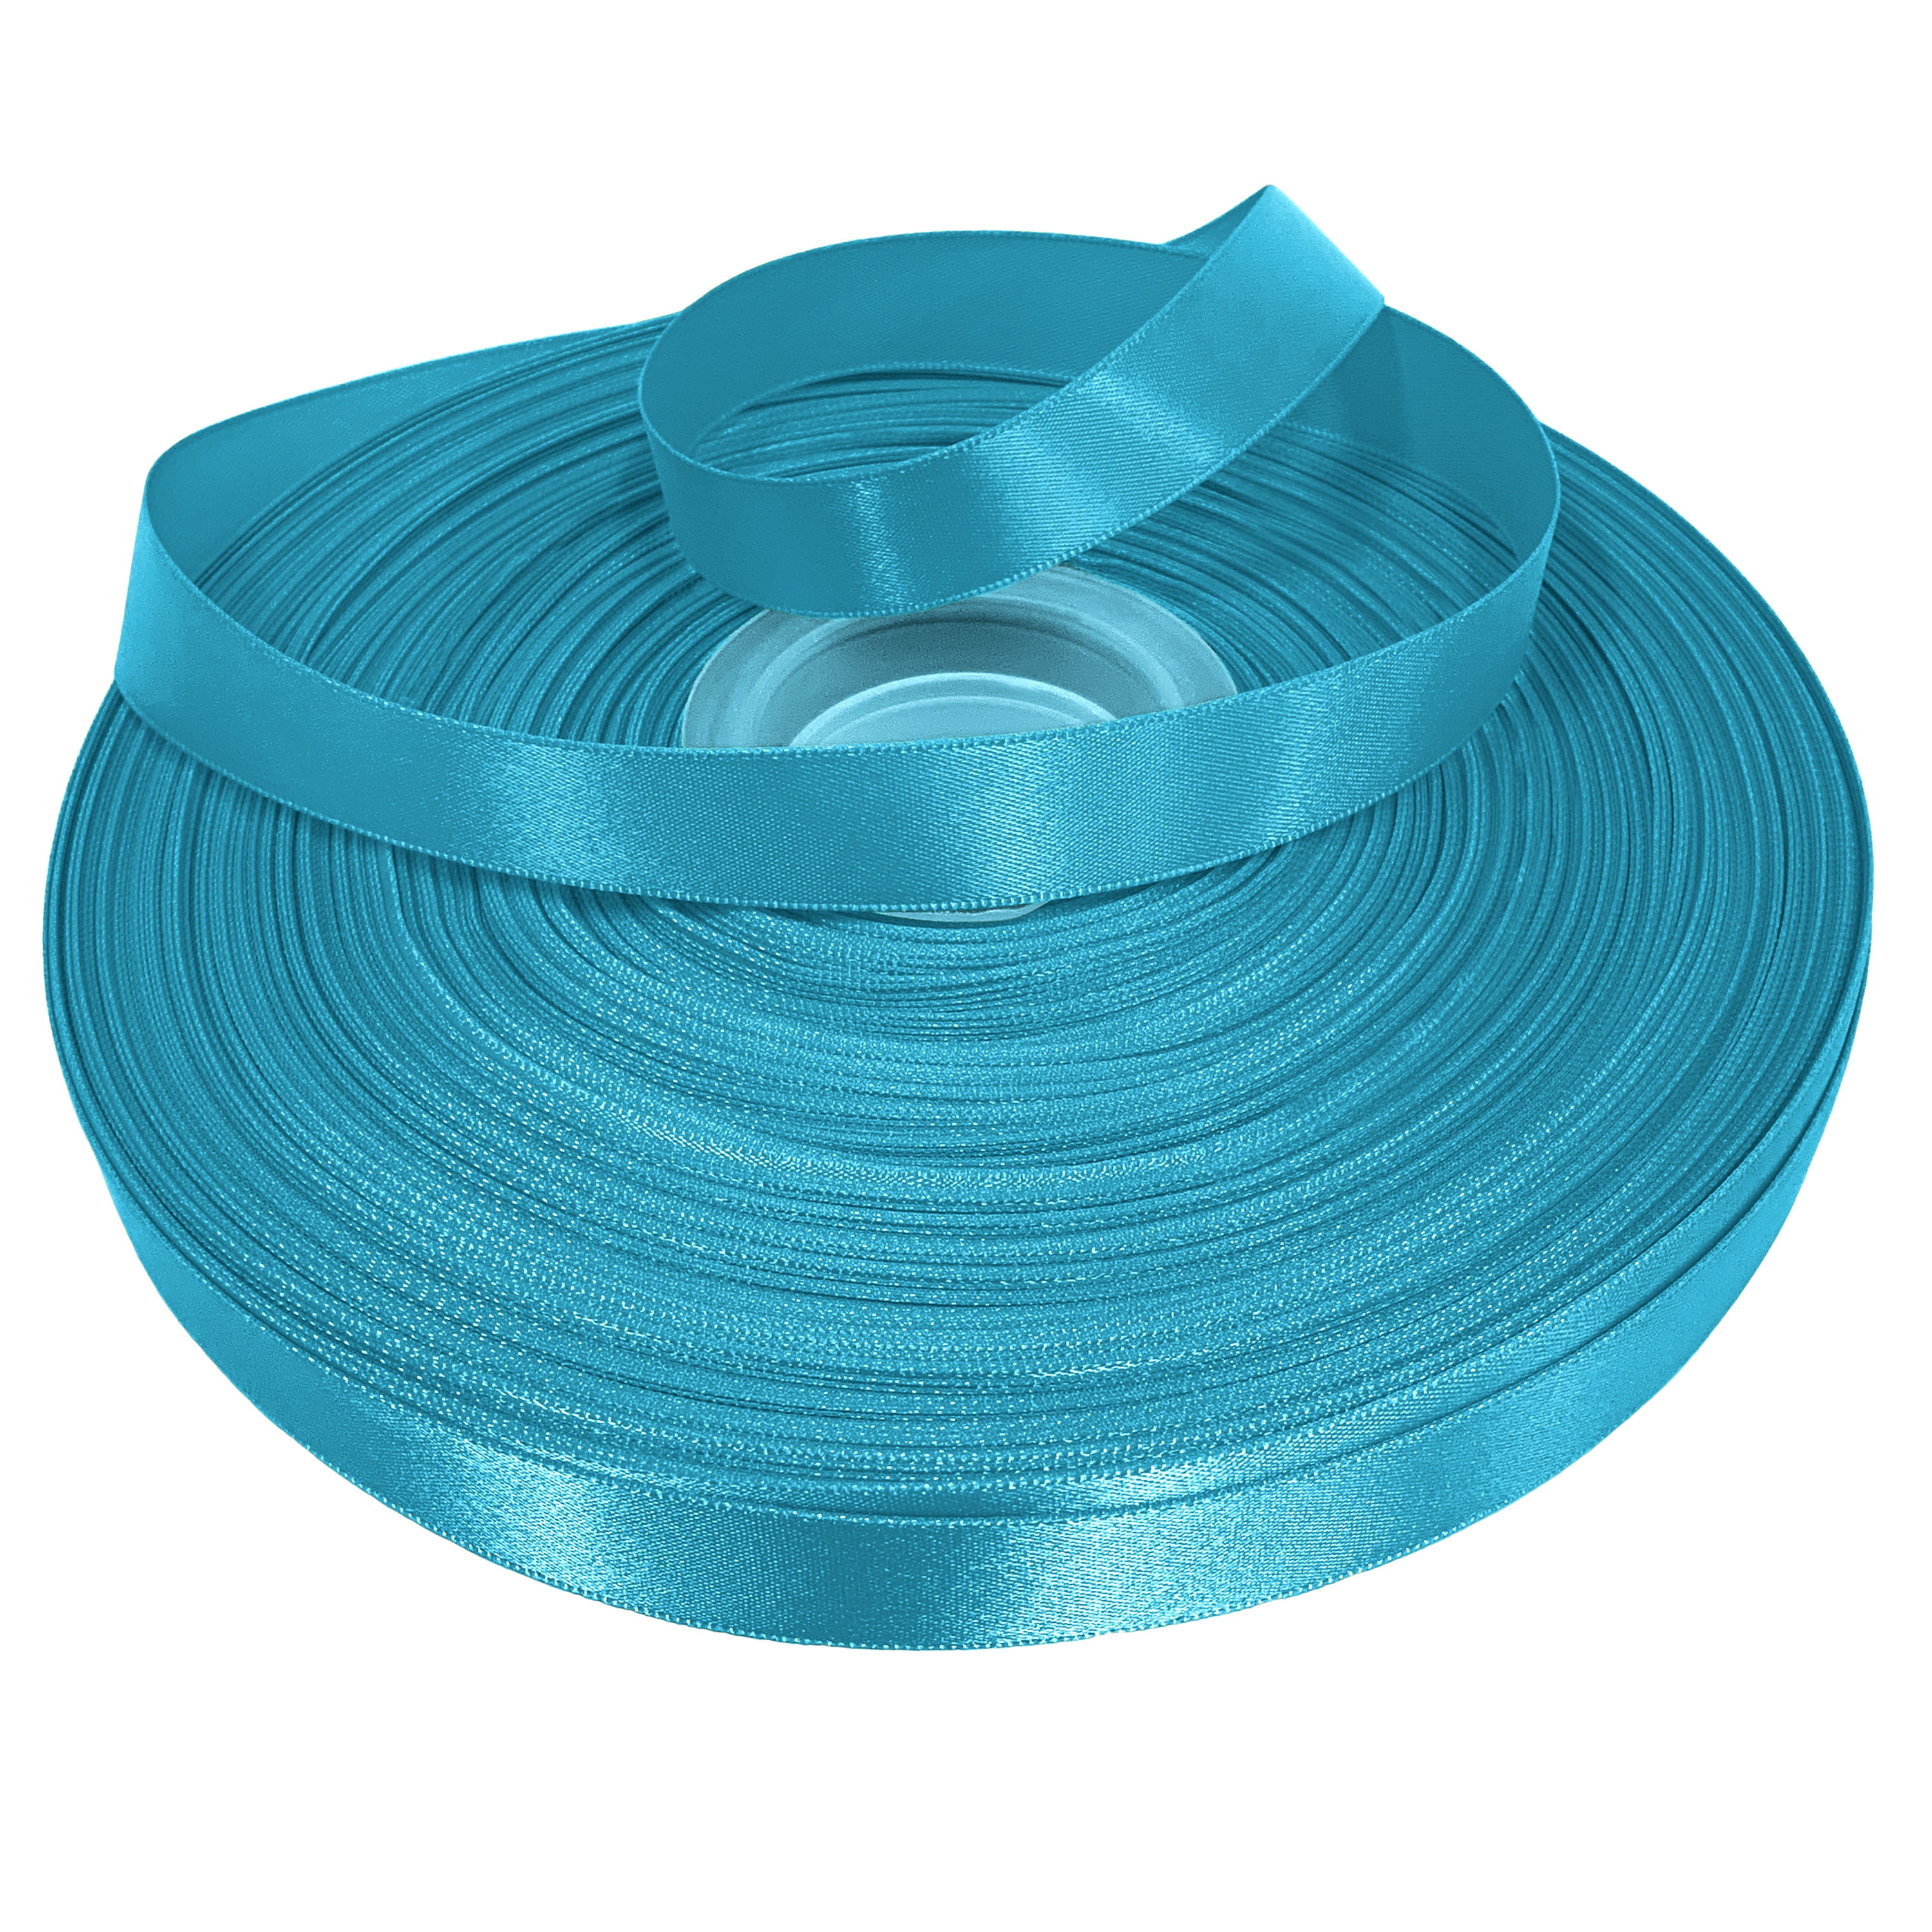 Buy Turquoise Blue Deluxe Satin Ribbon (1 1/2 Inch x 50 Yards), JAM Paper